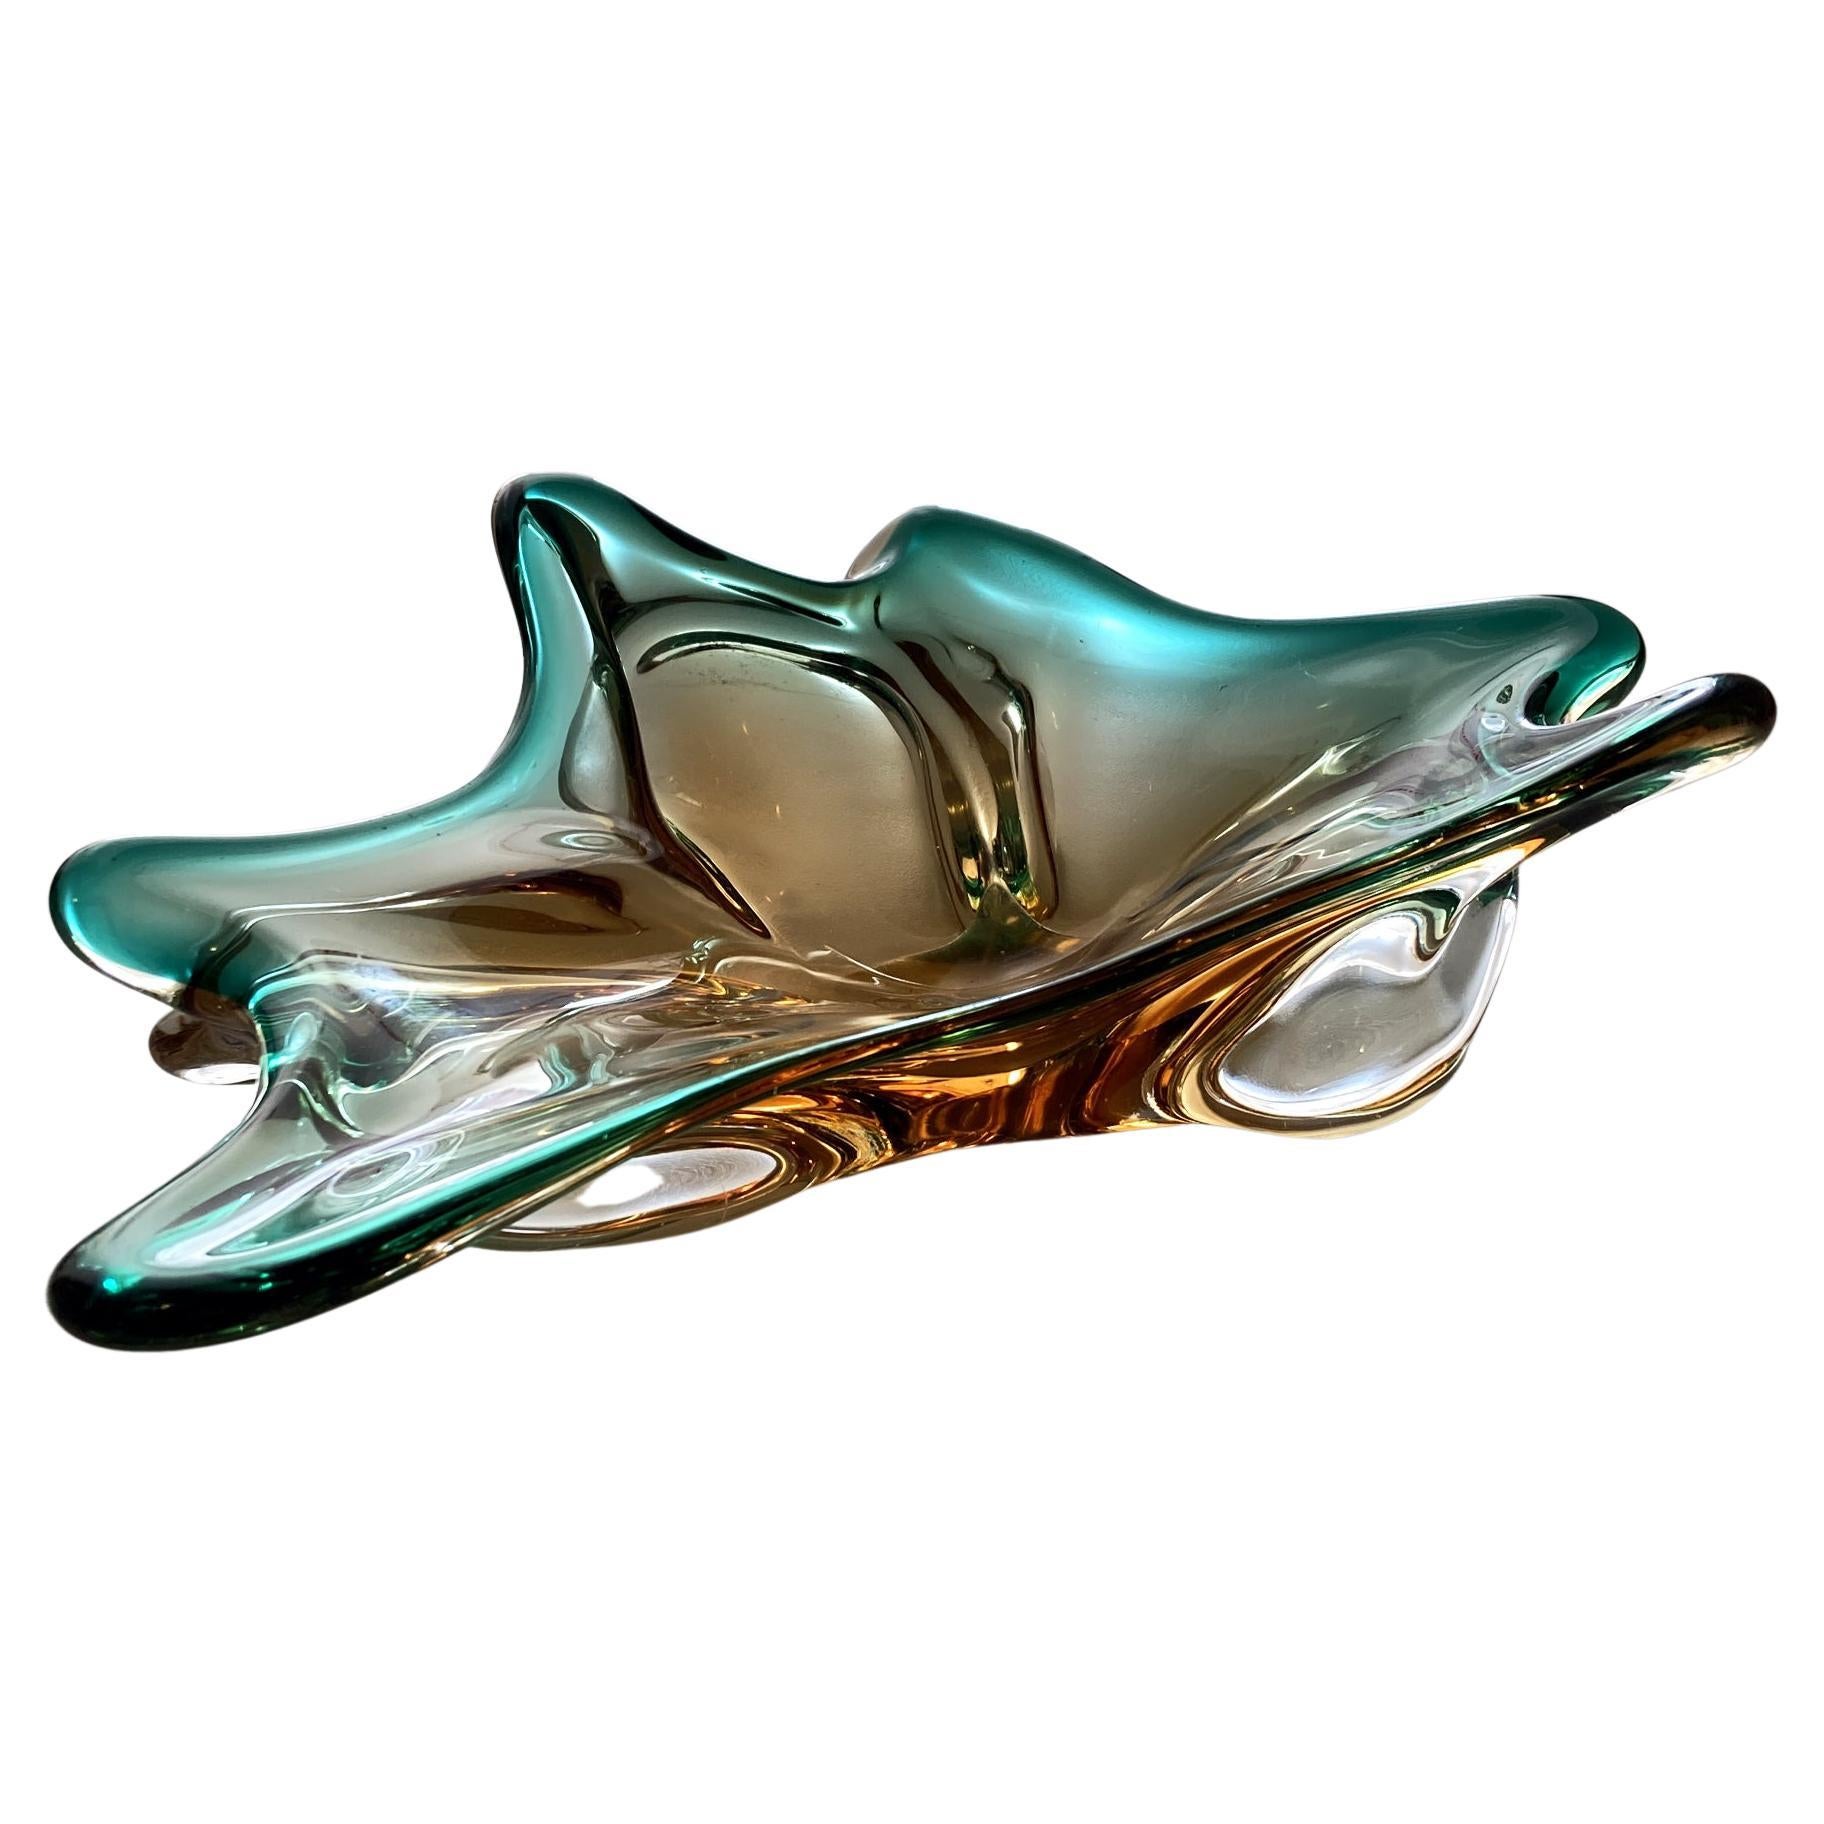 Stunning Murano hand blown centerpiece bowl in the sommerso technique of layered colored glass. Bold green and amber layers of glass glitter when the light hits this piece at different angles. In good vintage condition, no chips or cracks, minor